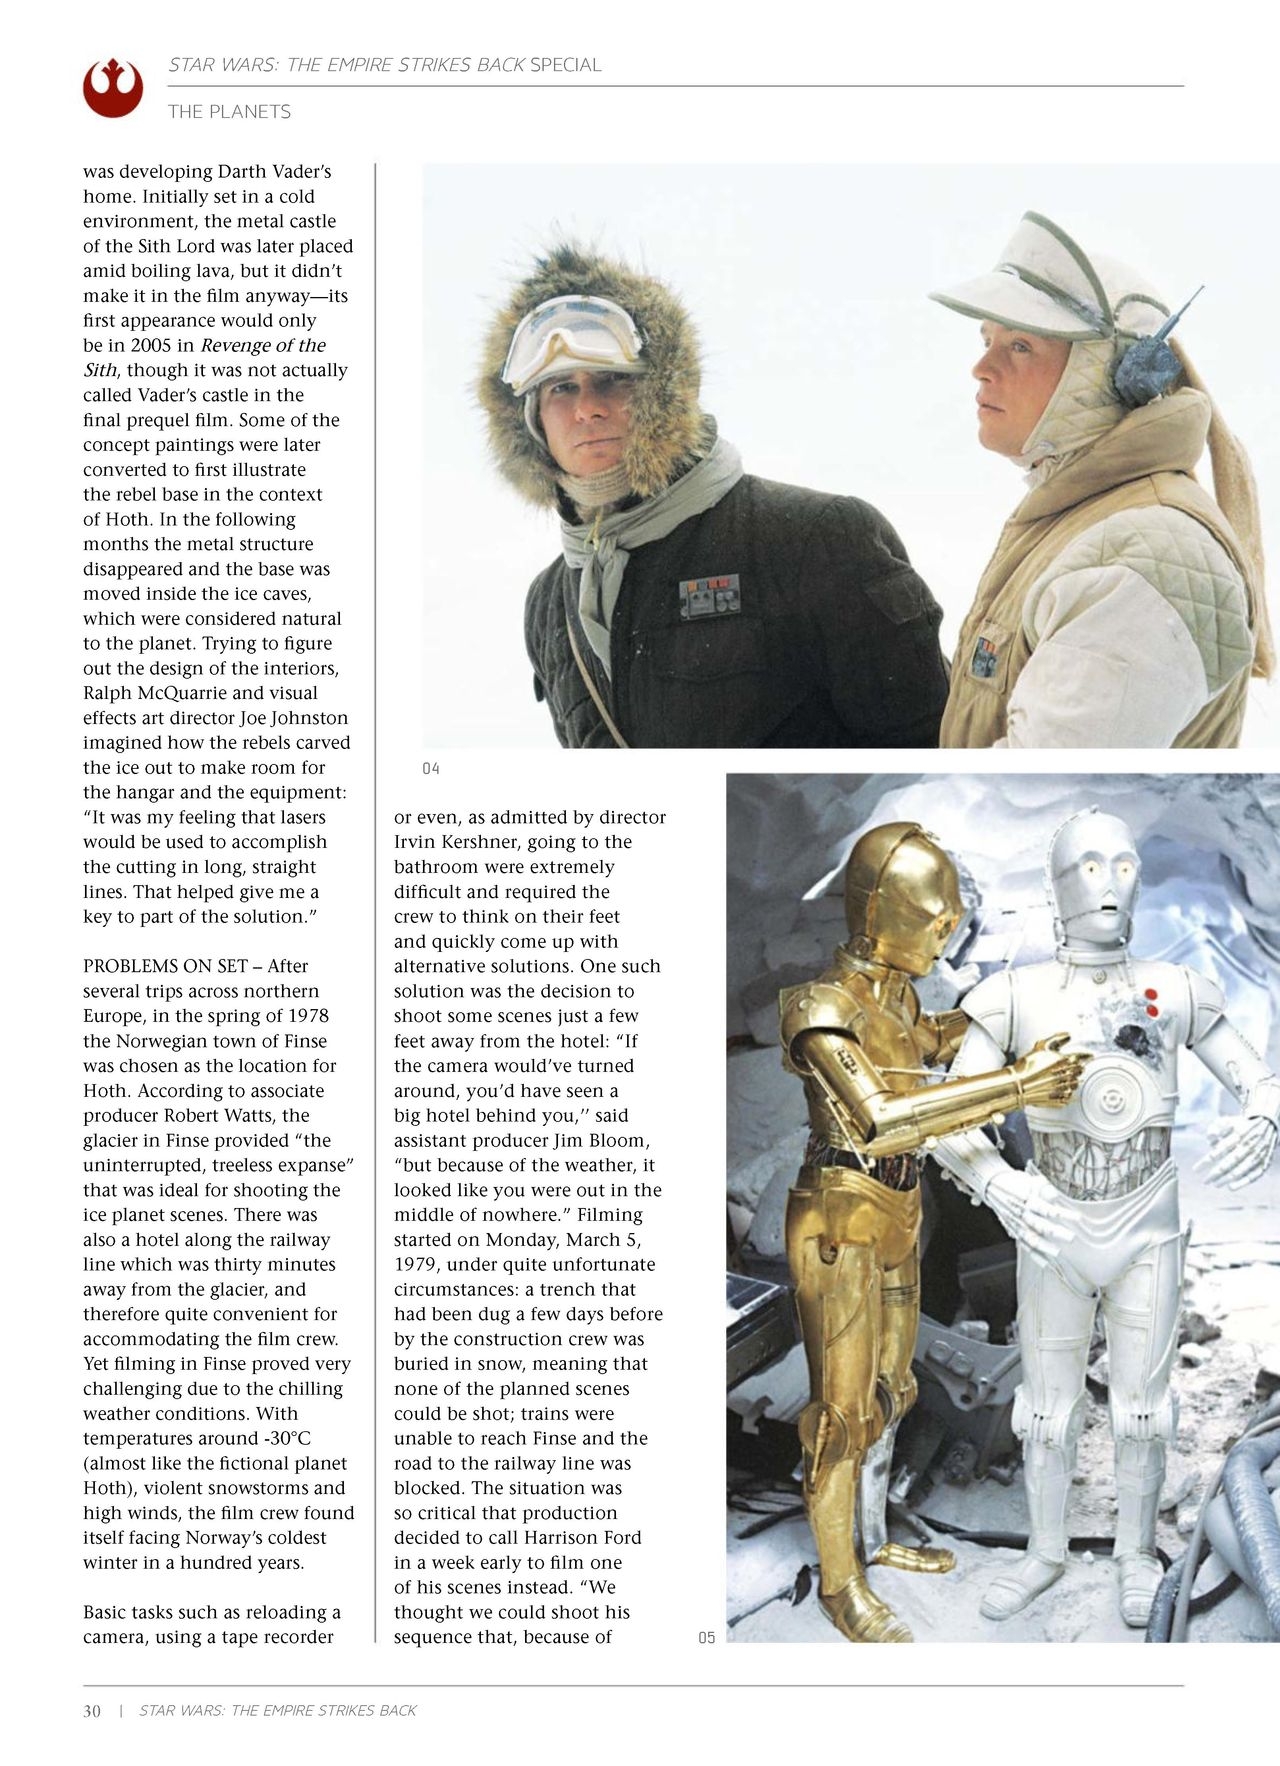 Star Wars - The Empire Strikes Back - The 40th Anniversary Special Edition 31